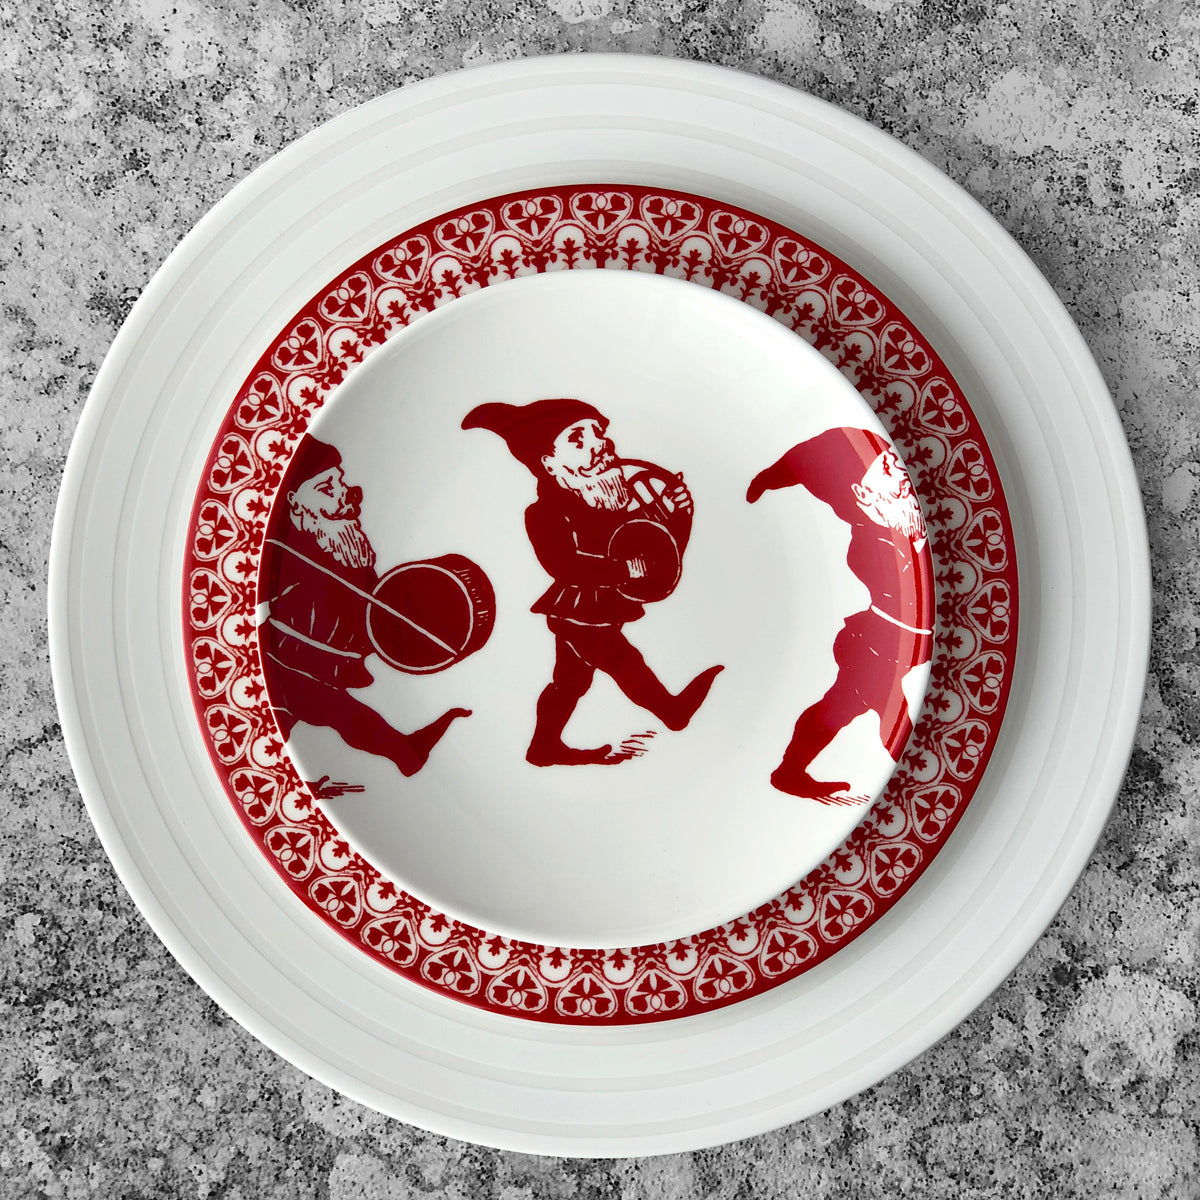 A white plate with a red decorative rim featuring three gnome-like figures playing musical instruments. The **Elves Small Plate** by **Caskata Artisanal Home**, part of an heirloom-quality dinnerware set, is placed on a larger white plate on a textured gray surface.